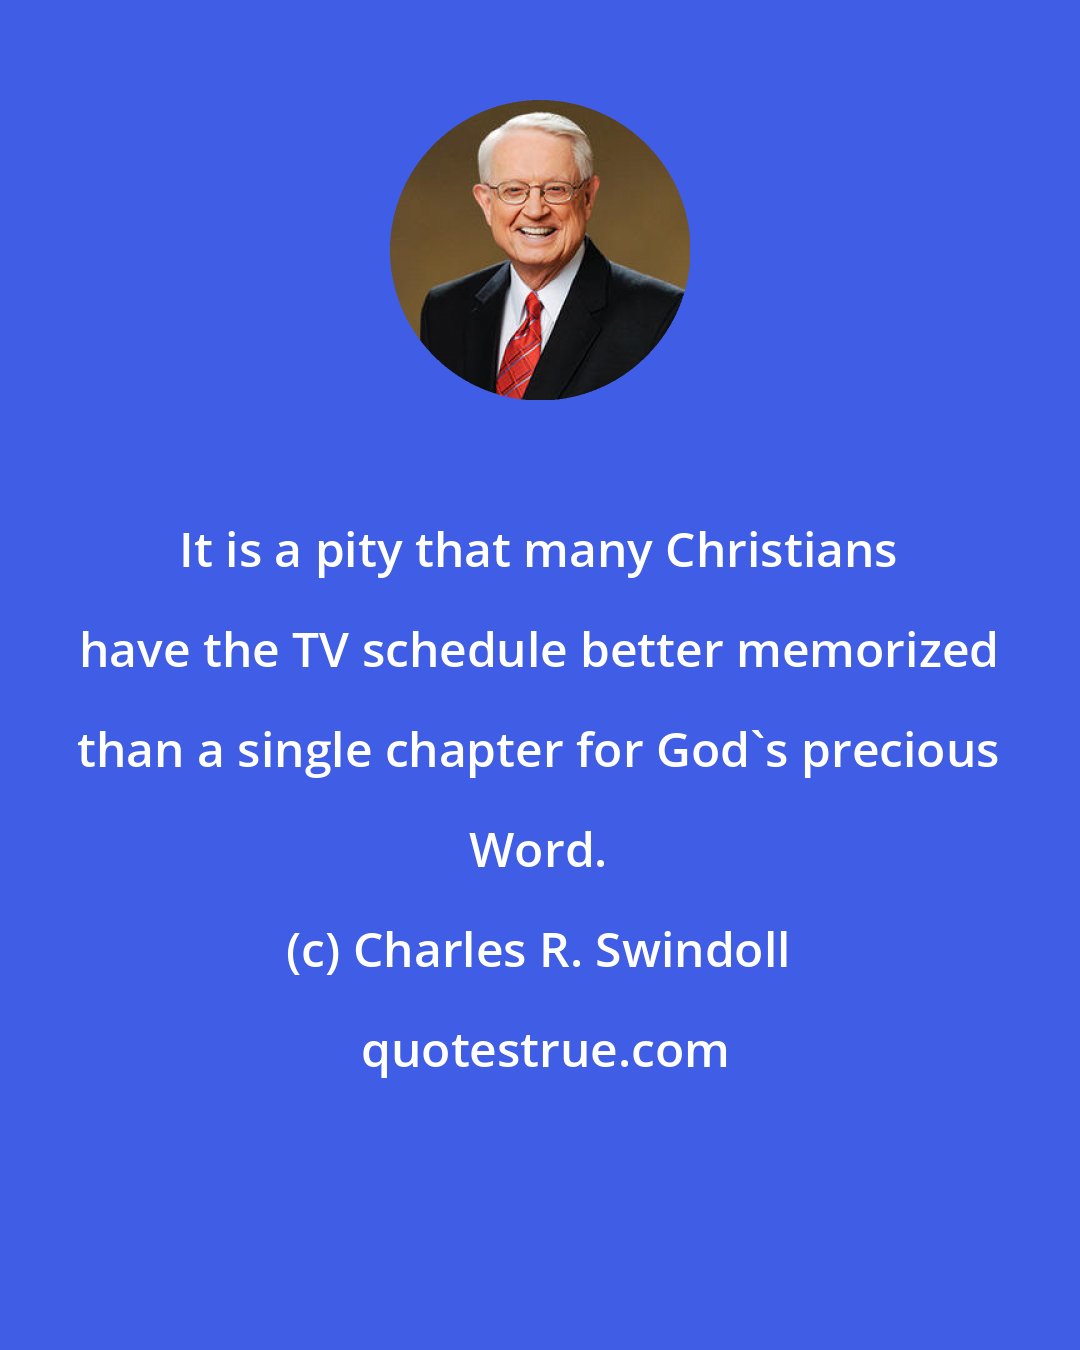 Charles R. Swindoll: It is a pity that many Christians have the TV schedule better memorized than a single chapter for God's precious Word.